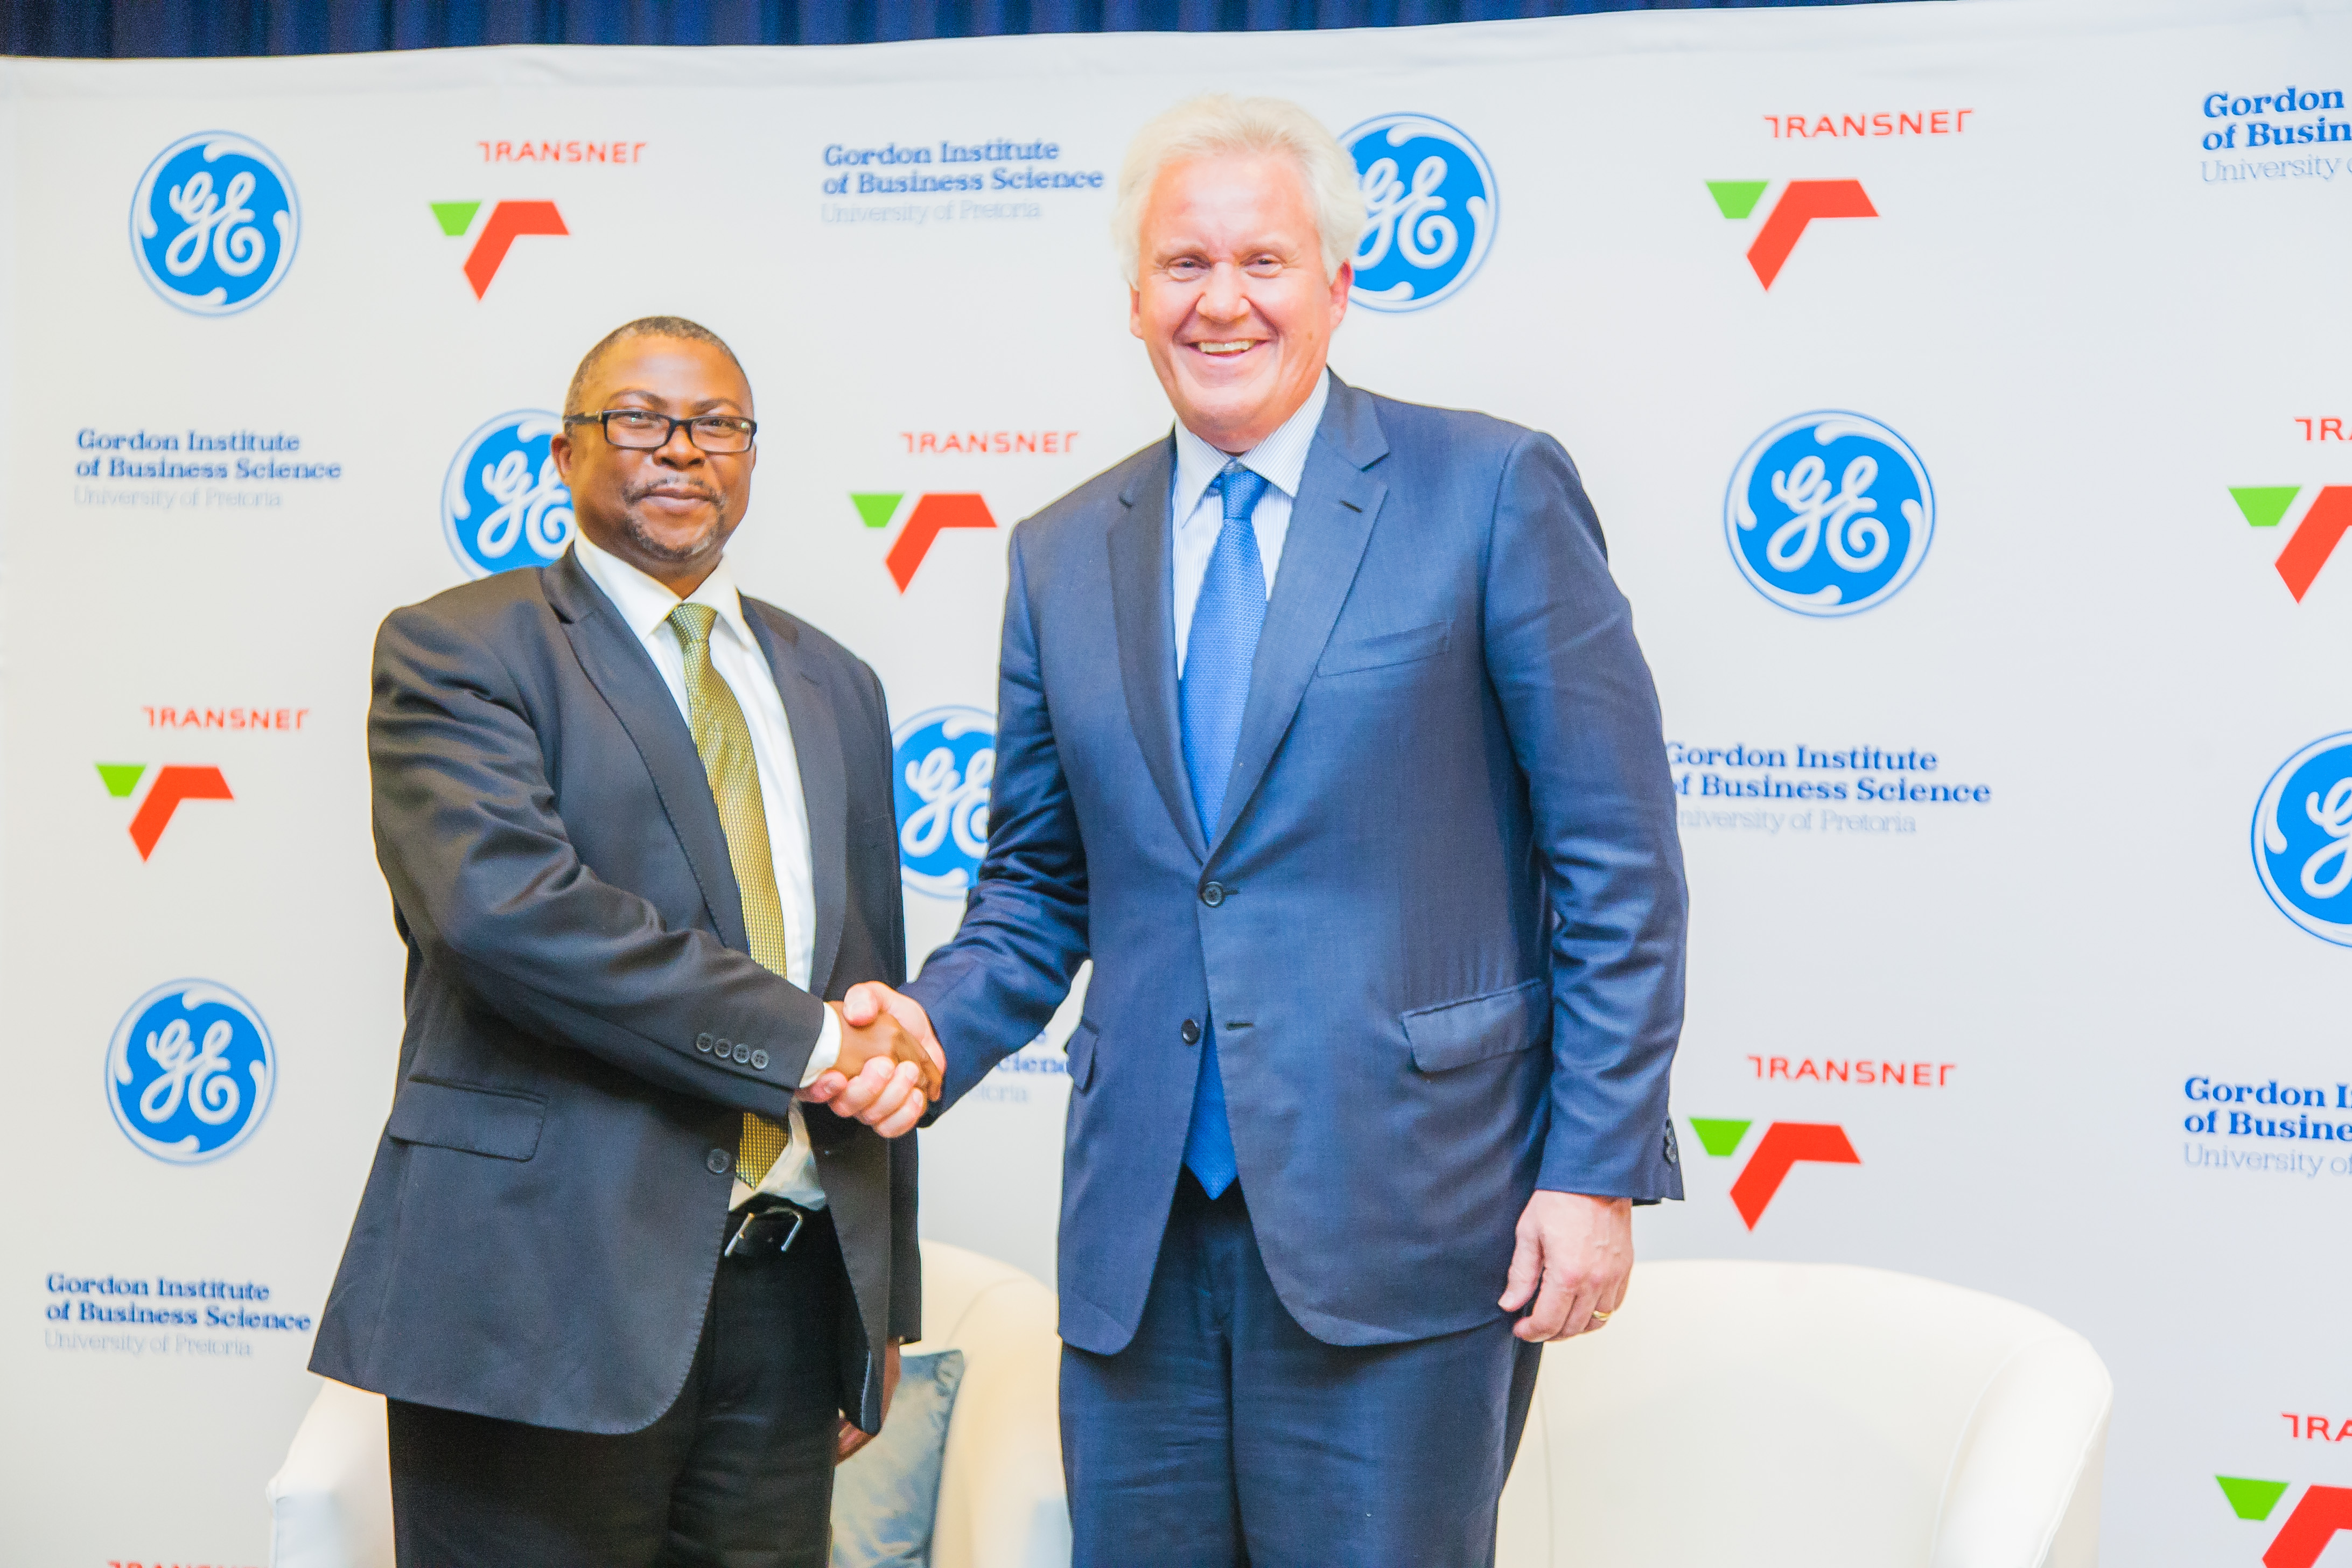 GE And Transnet Share Their Plan To Digitise Africa